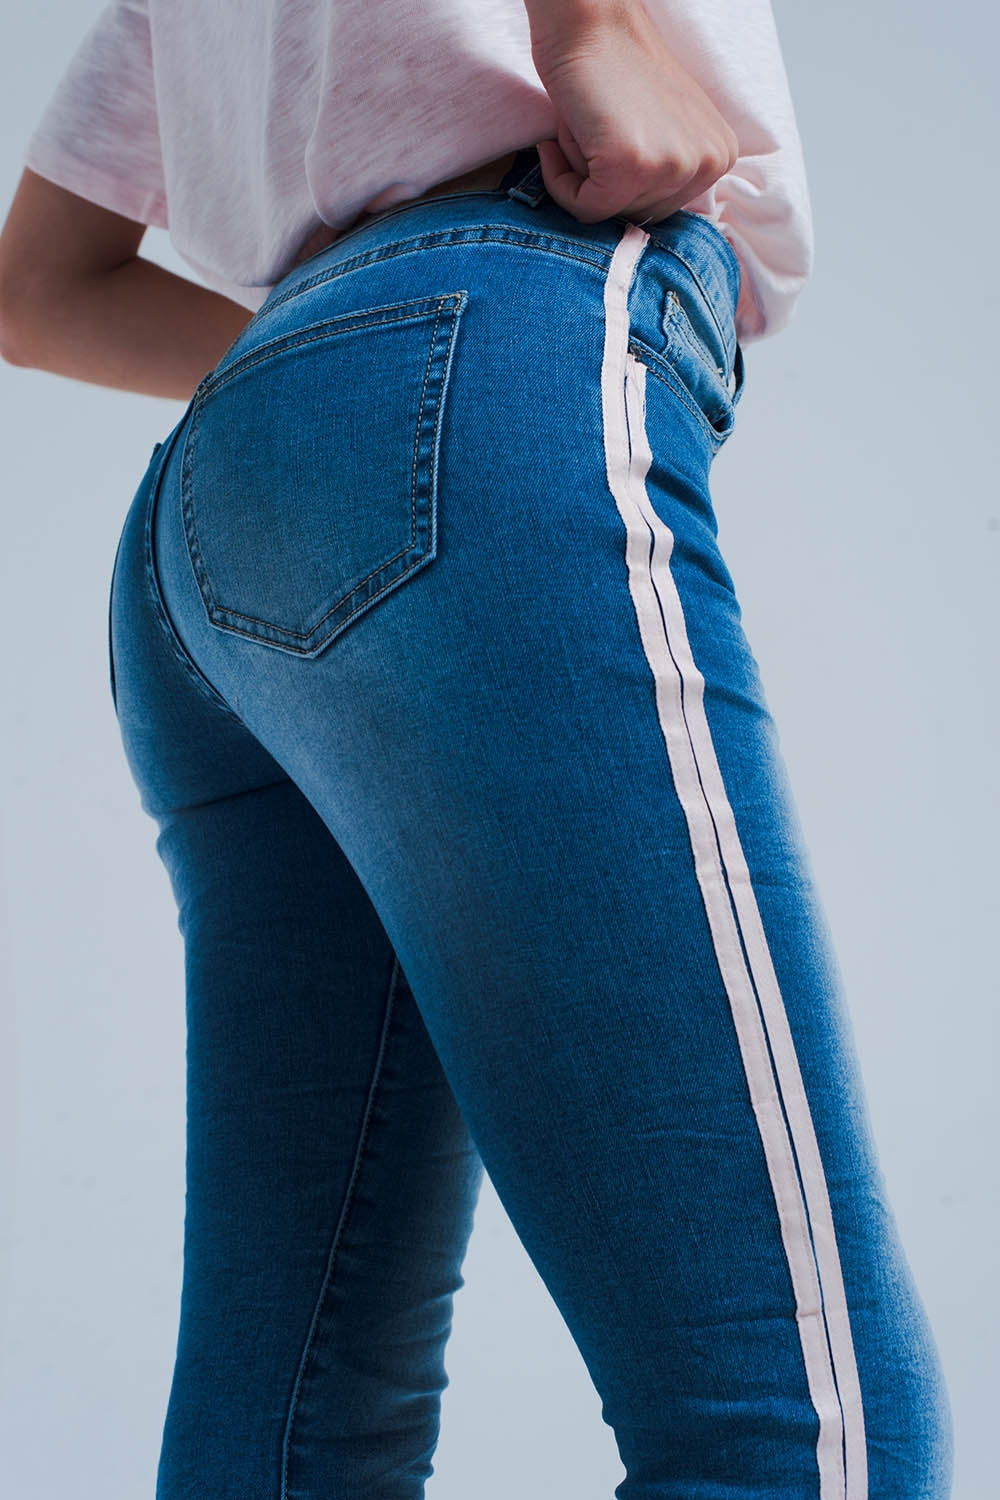 Q2 Skinny jeans with side seam stripes